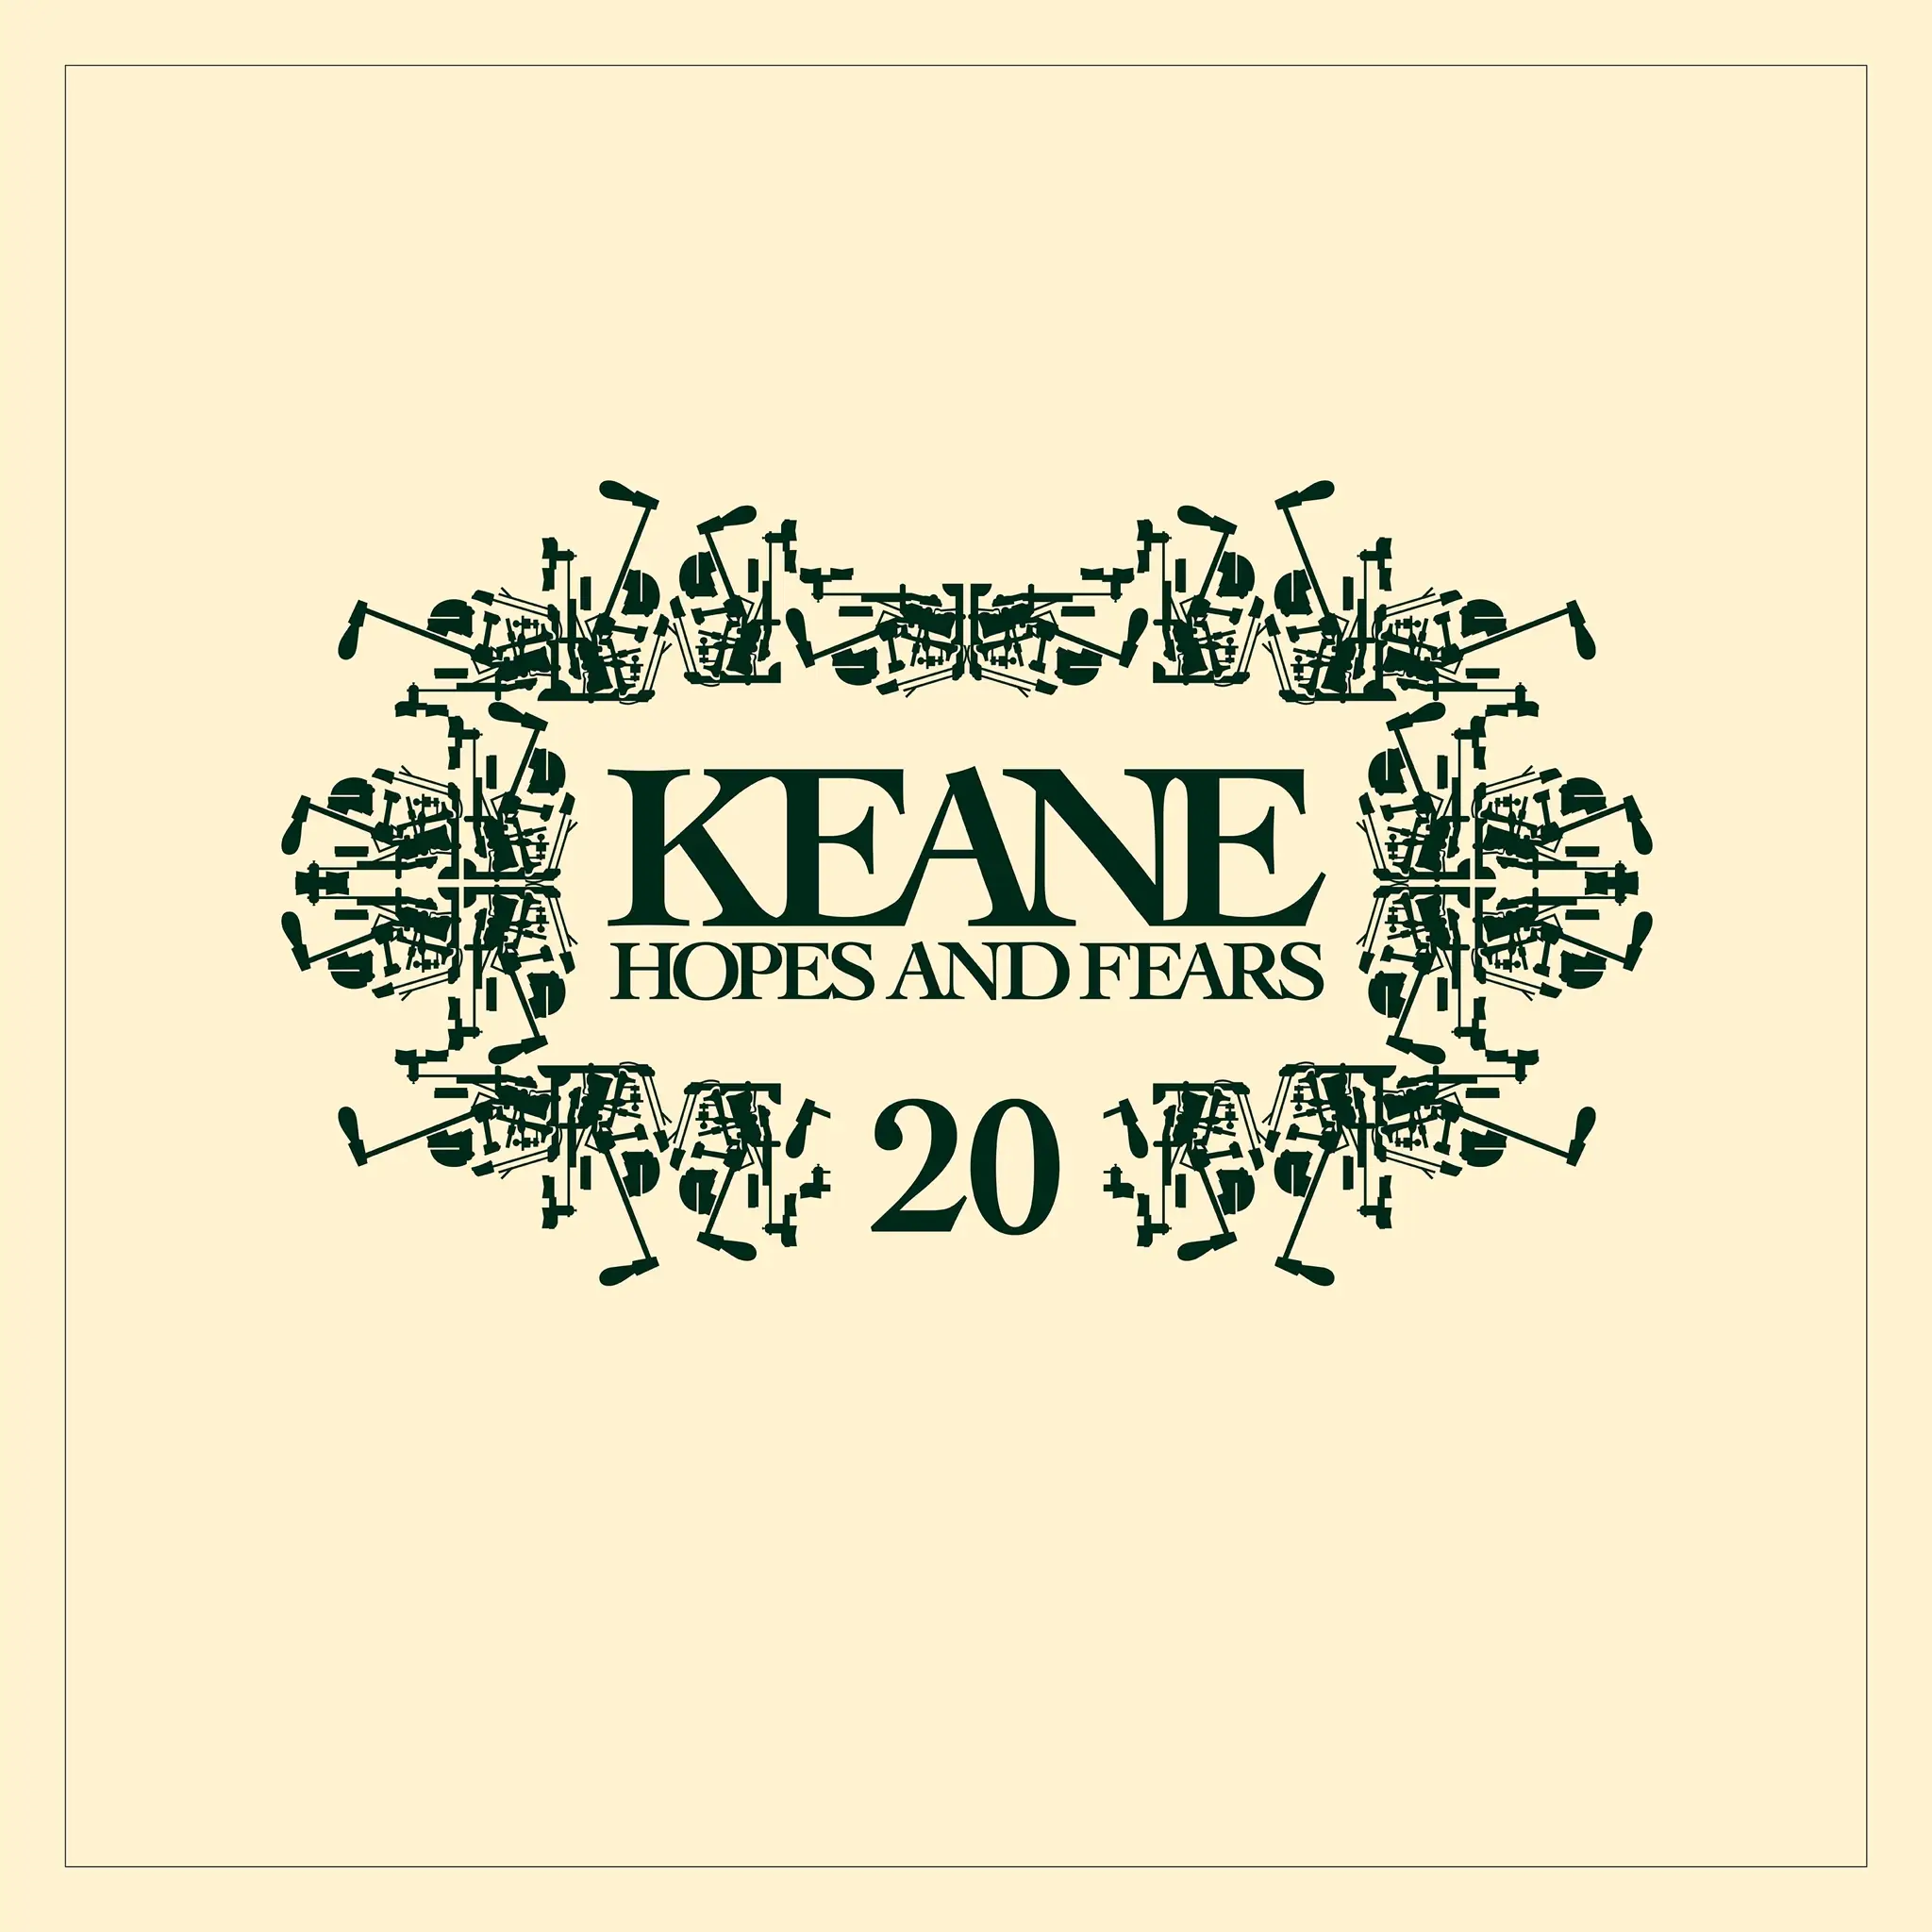 <strong>Keane - Hopes and Fears 20th Anniversary</strong> (Vinyl LP - clear)